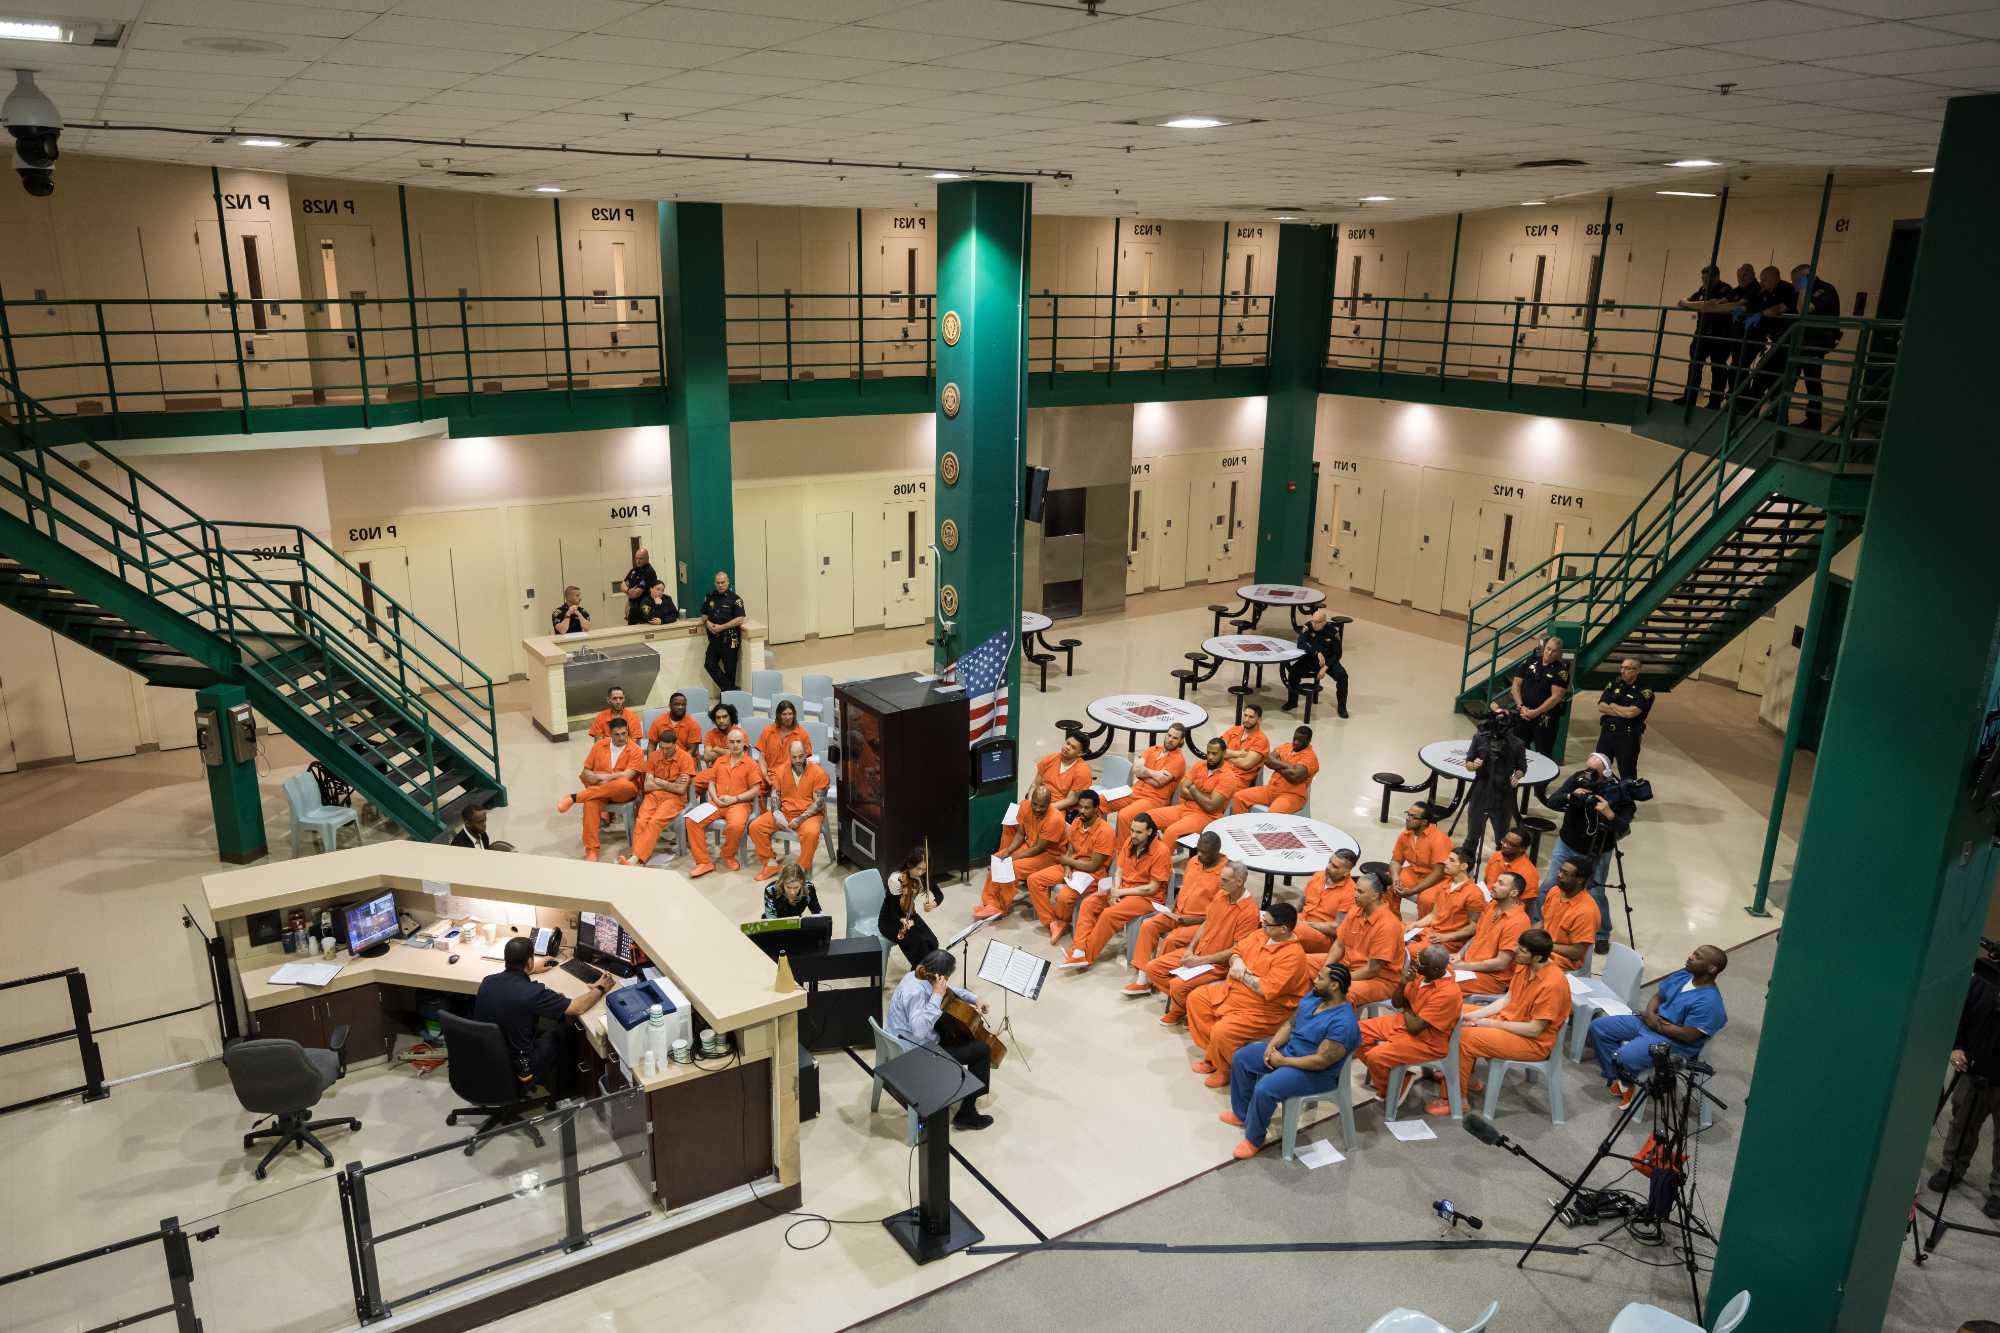 Overhead view of incarcerated people in orange jumpsuits seated for a performance by the ROC城市演唱会 musicians.